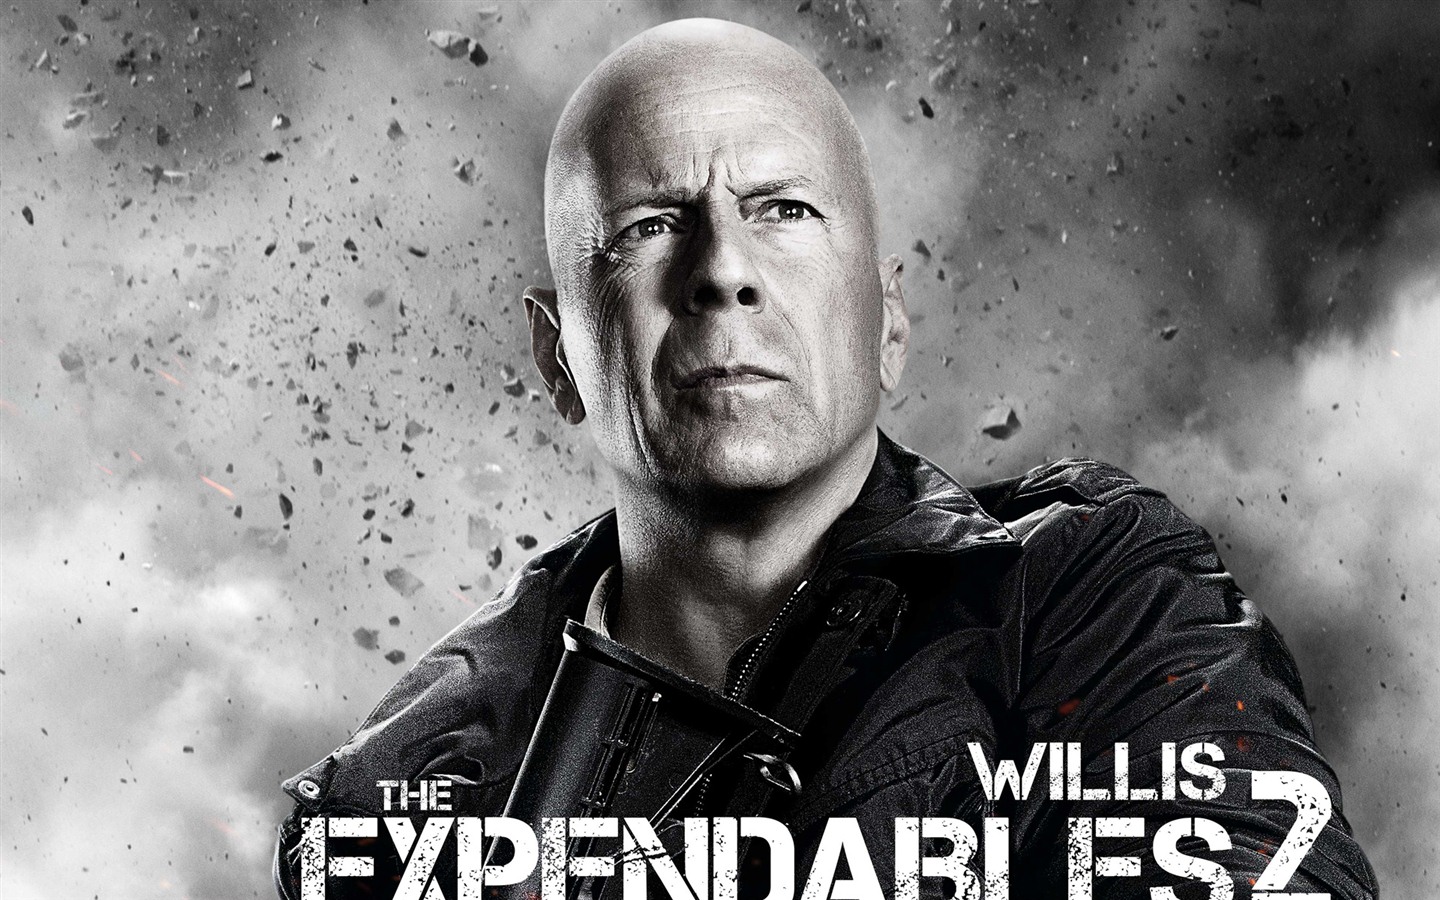 2012 Expendables2 HDの壁紙 #12 - 1440x900